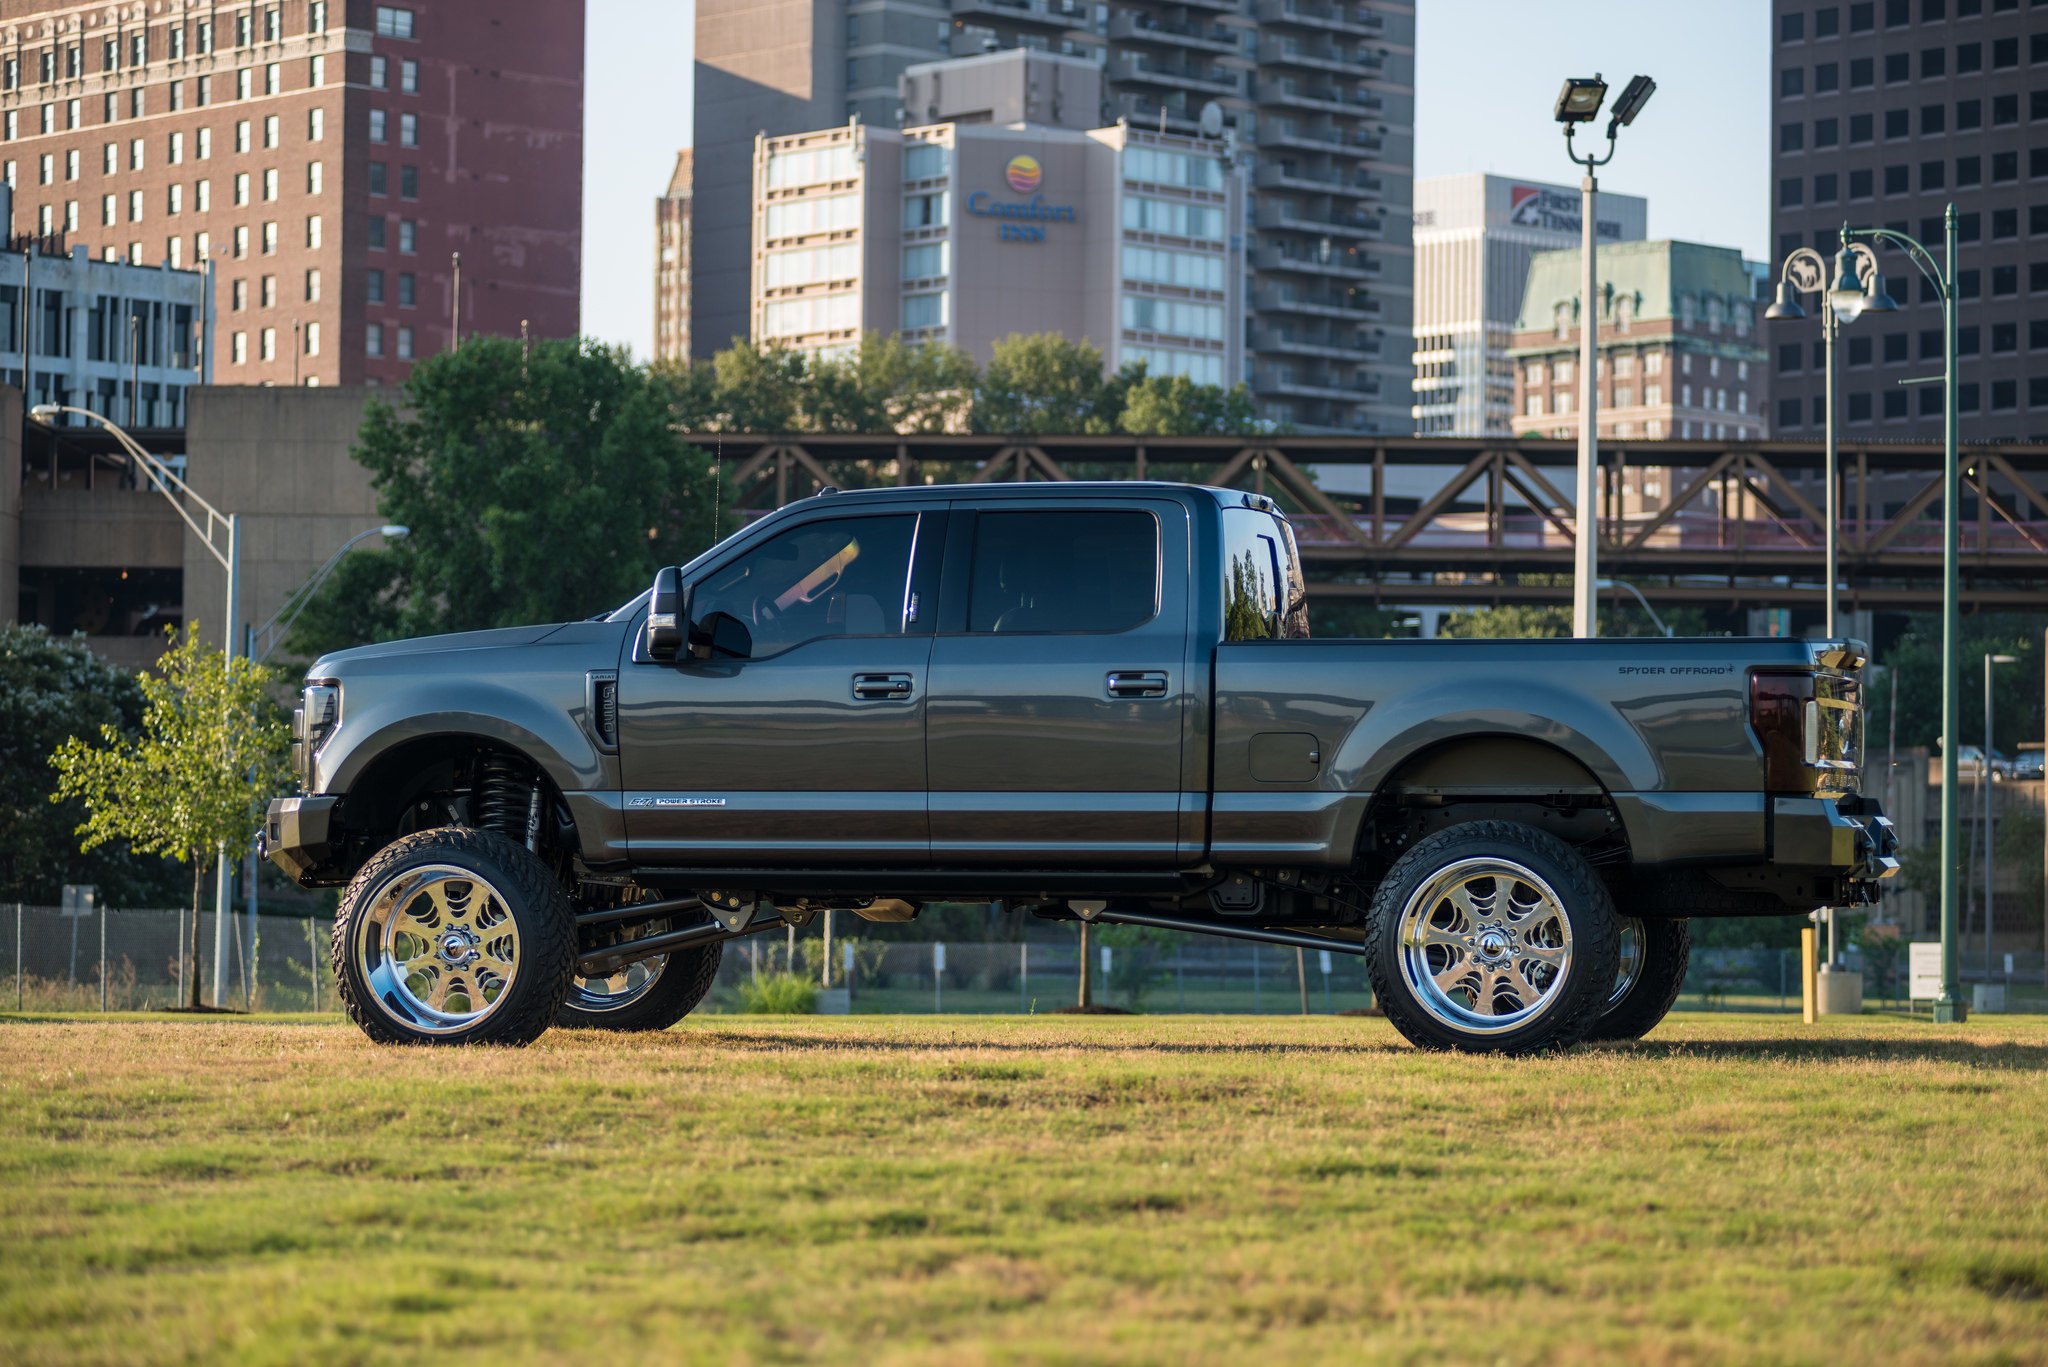 Fuel Offroad Wheels on Black Lifted Ford F-250 - Photo by Fuel Off-road